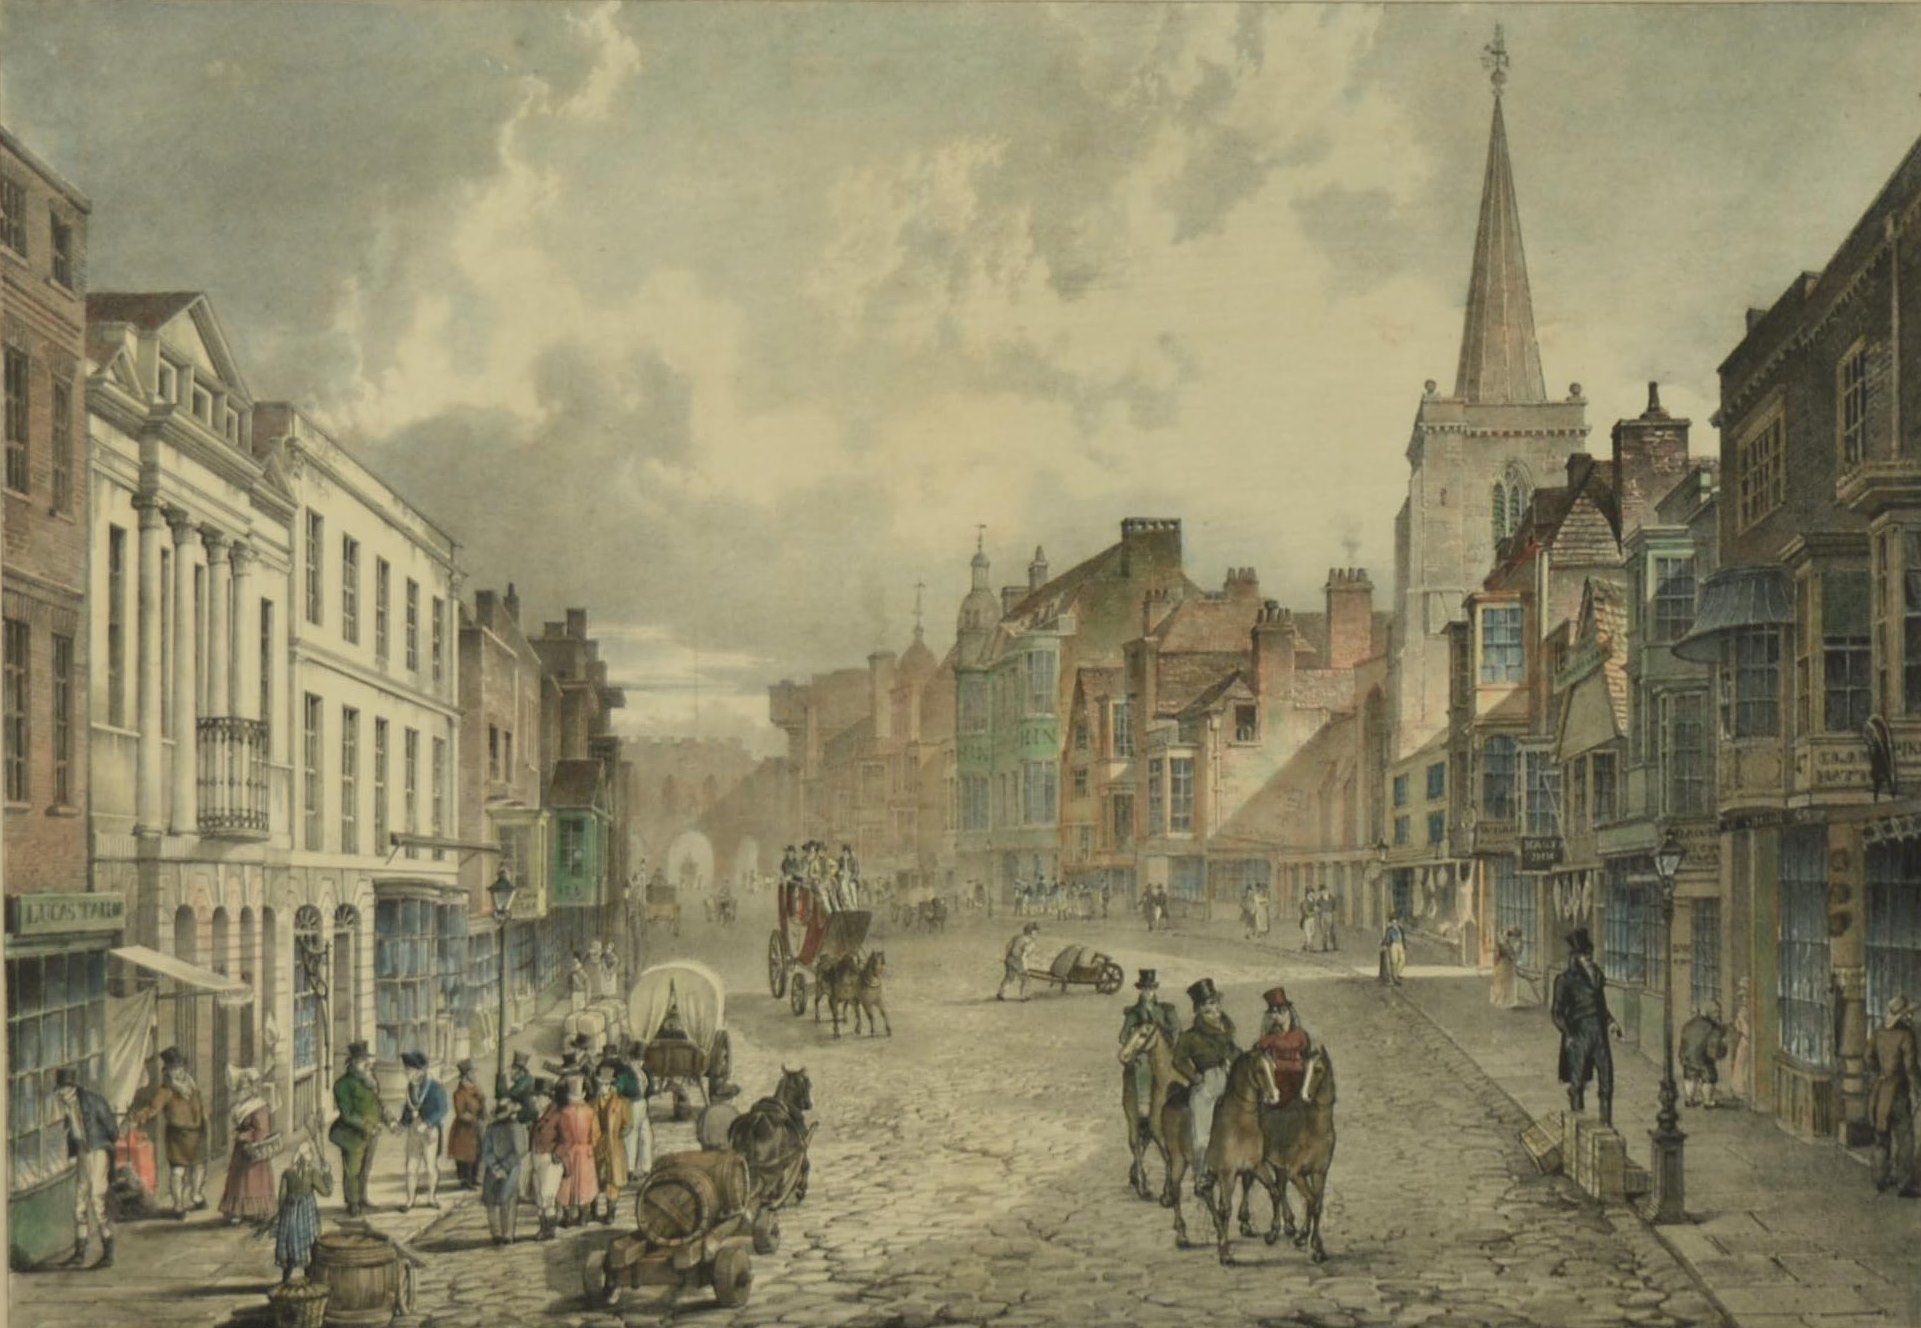 southampton in 1828 showing the gas lamps.